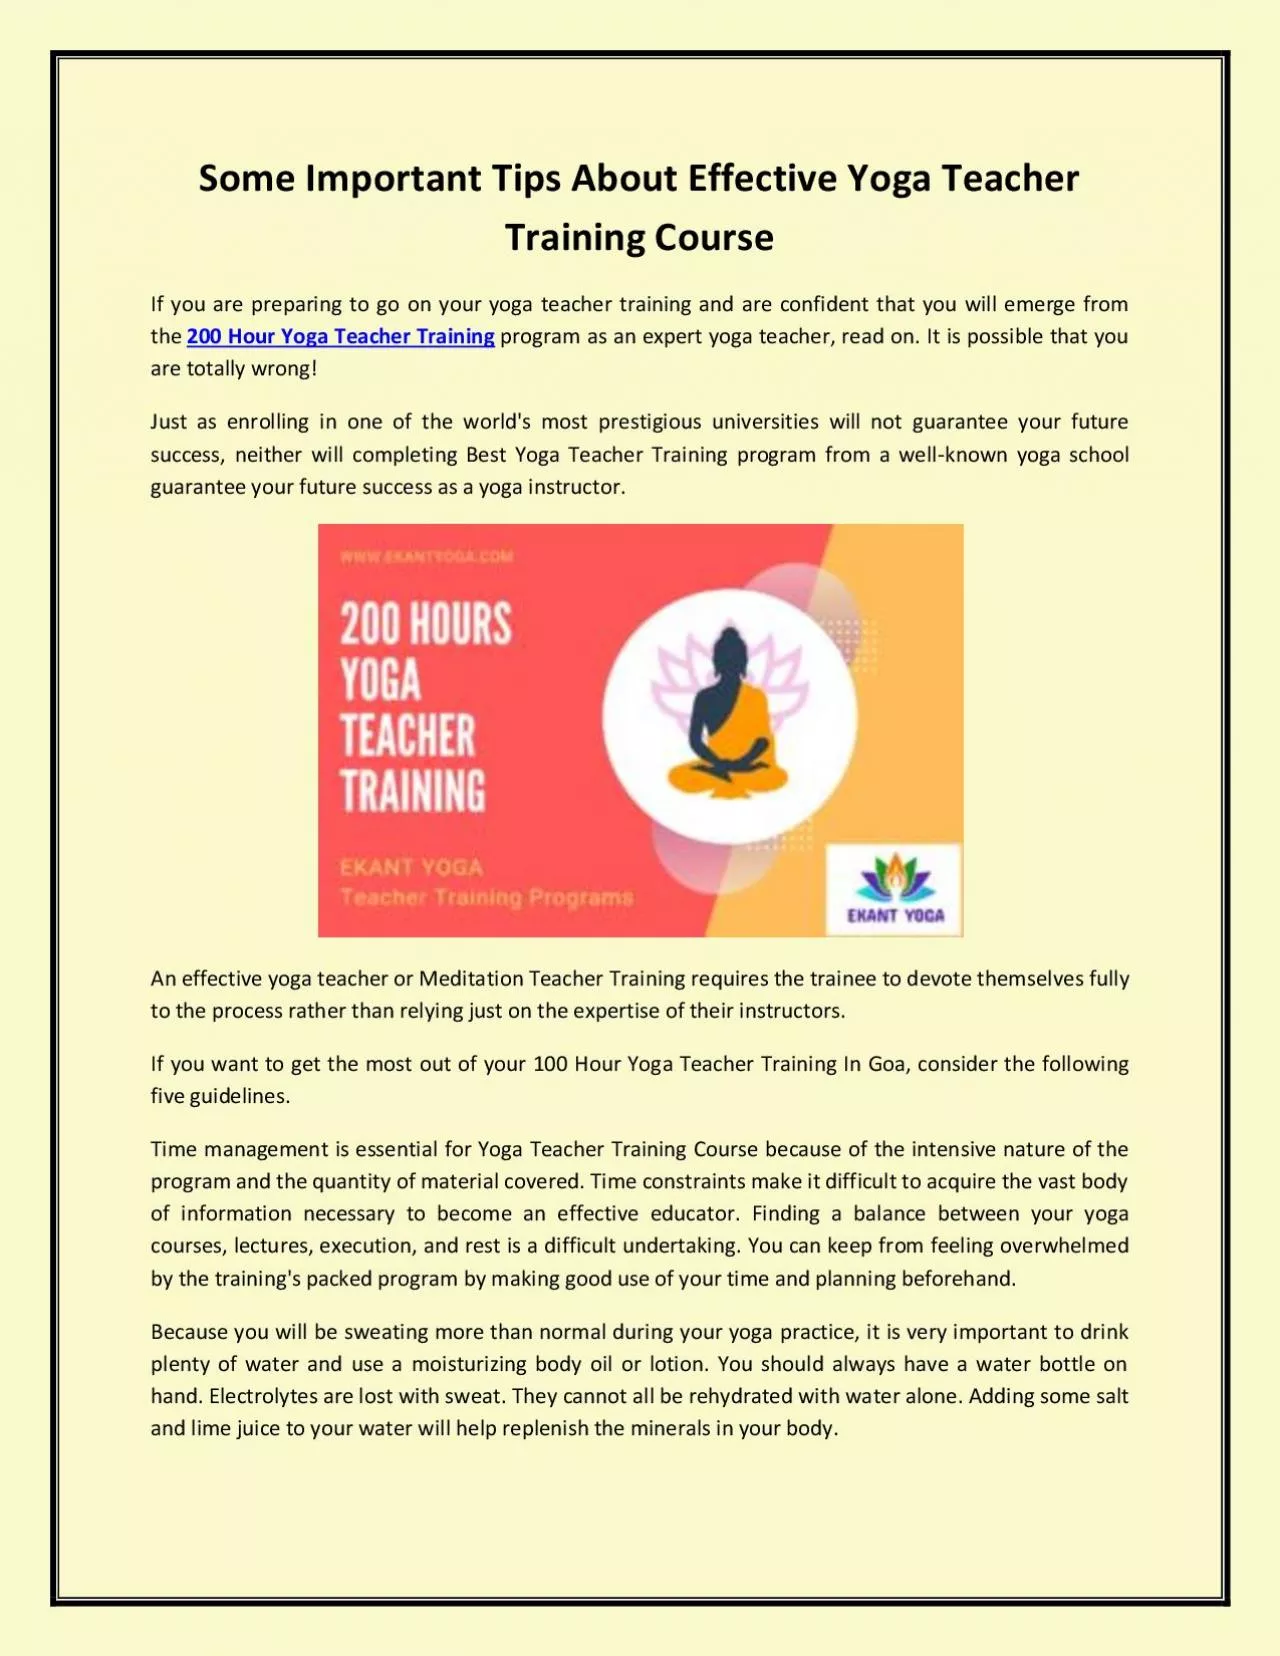 Some Important Tips About Effective Yoga Teacher Training Course